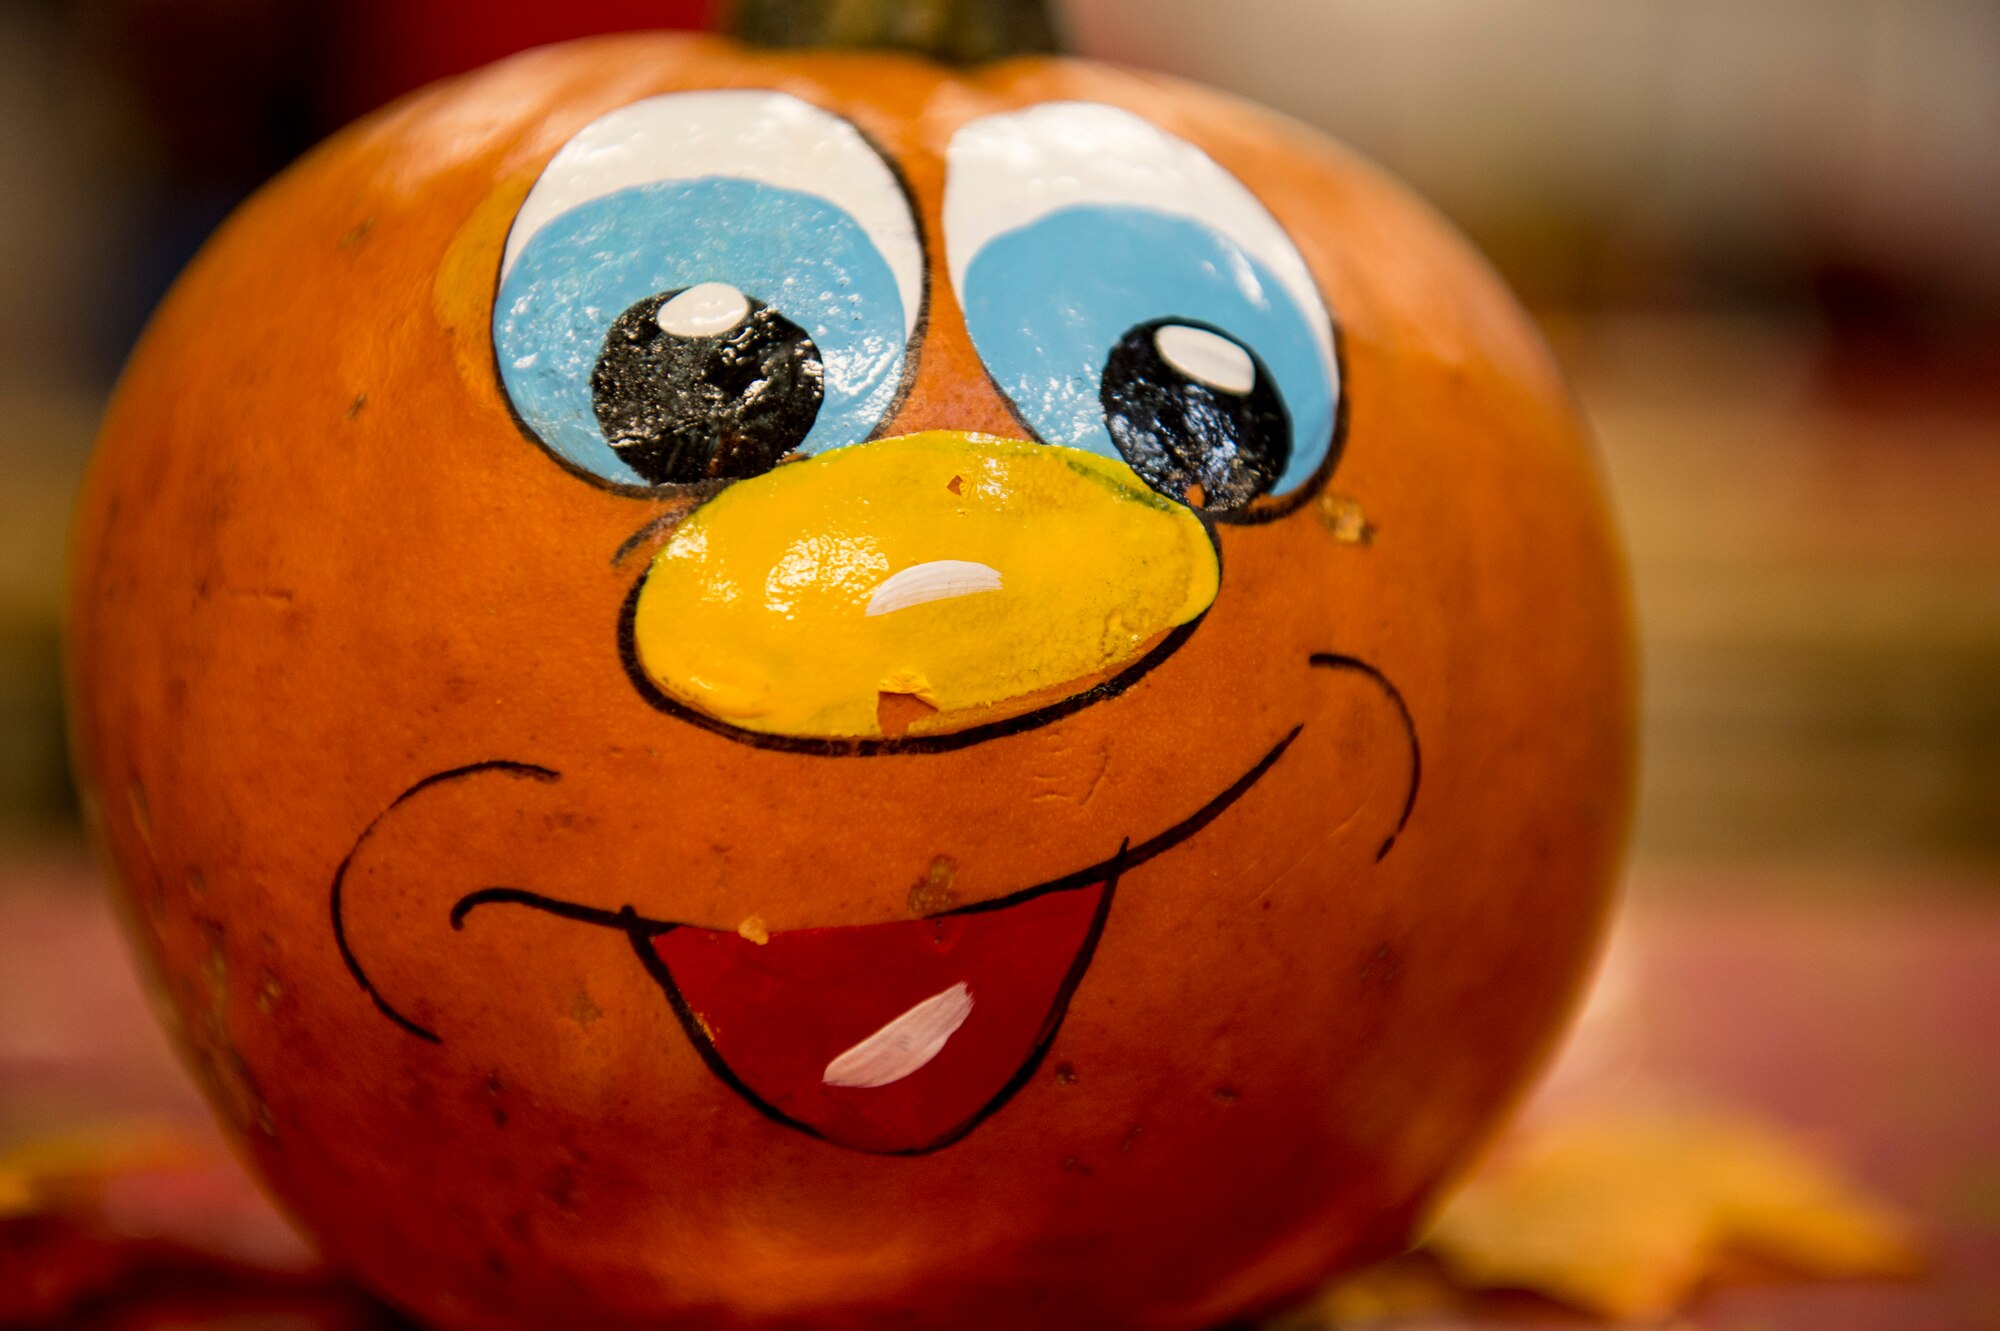 A pumpkin is displayed on a table during the Deployed Family Member Thanksgiving dinner, inside Fire Station 1 at Spangdahlem Air Base, Germany, Nov. 18, 2015.  Families ate a Thanksgiving meal while kids played inside a bouncy castle and interacted with Santa Claus at the event. (U.S. Air Force photo by Senior Airman Rusty Frank/Released)